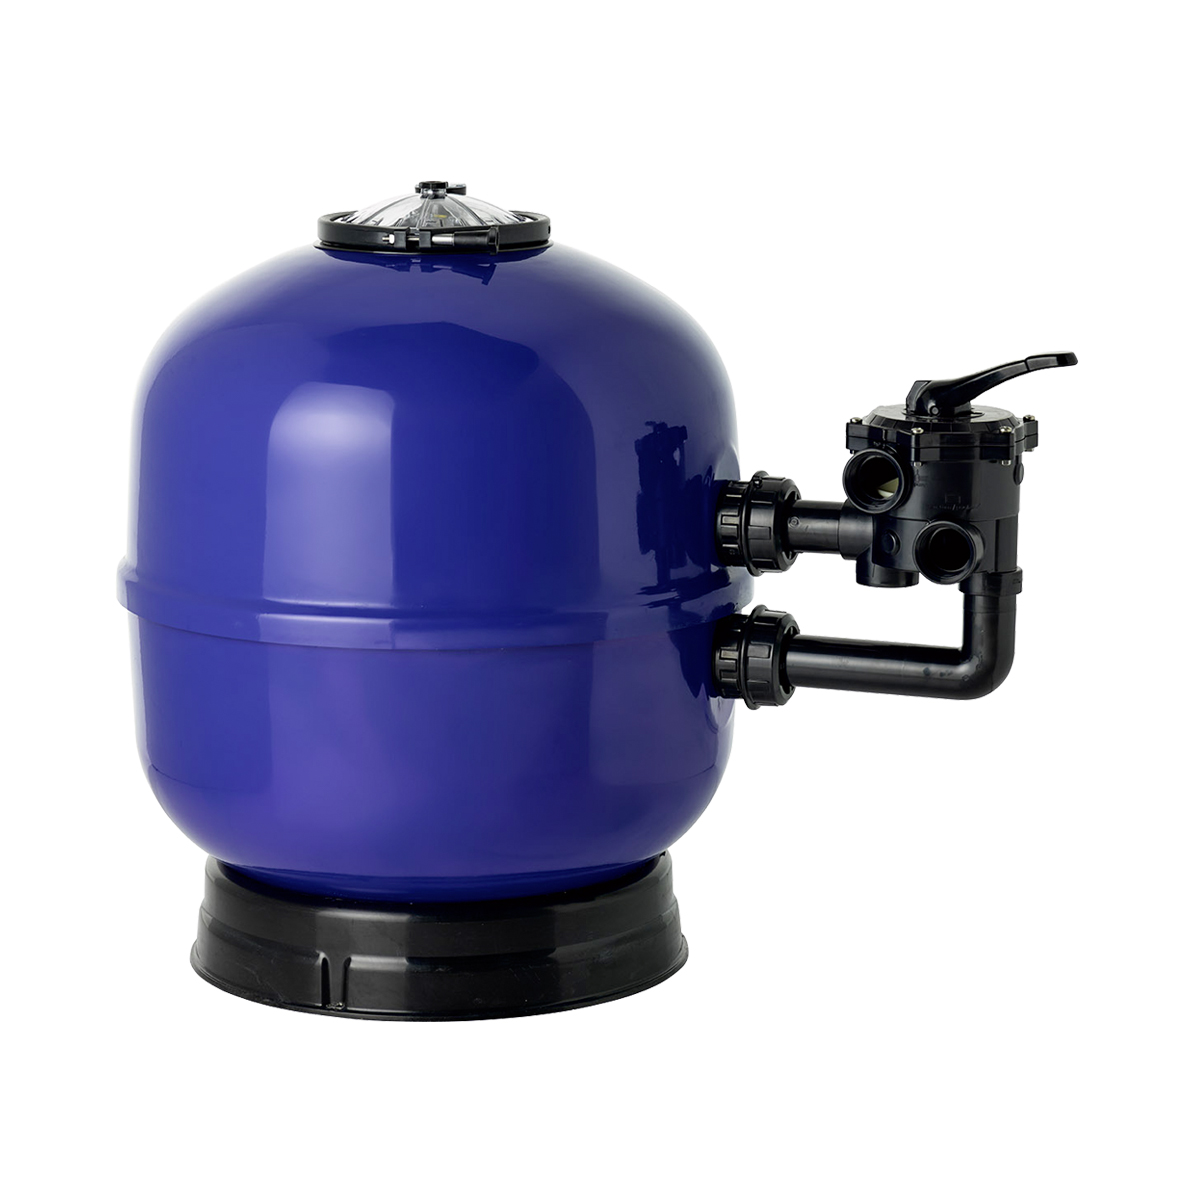 Polyester Sand filter VIENNA laminated, sand filter side mount blue 500 - 20" incl. manometer incl. piping set neutral und single packed, with  original Praher 1 ½" 6 way vaklve manual
 Polyester Sand filter VIENNA laminated, sand filter side mount blue 500 - 20" incl. manometer incl. piping set neutral und single packed, with  original Praher 1 ½" 6 way vaklve manual
